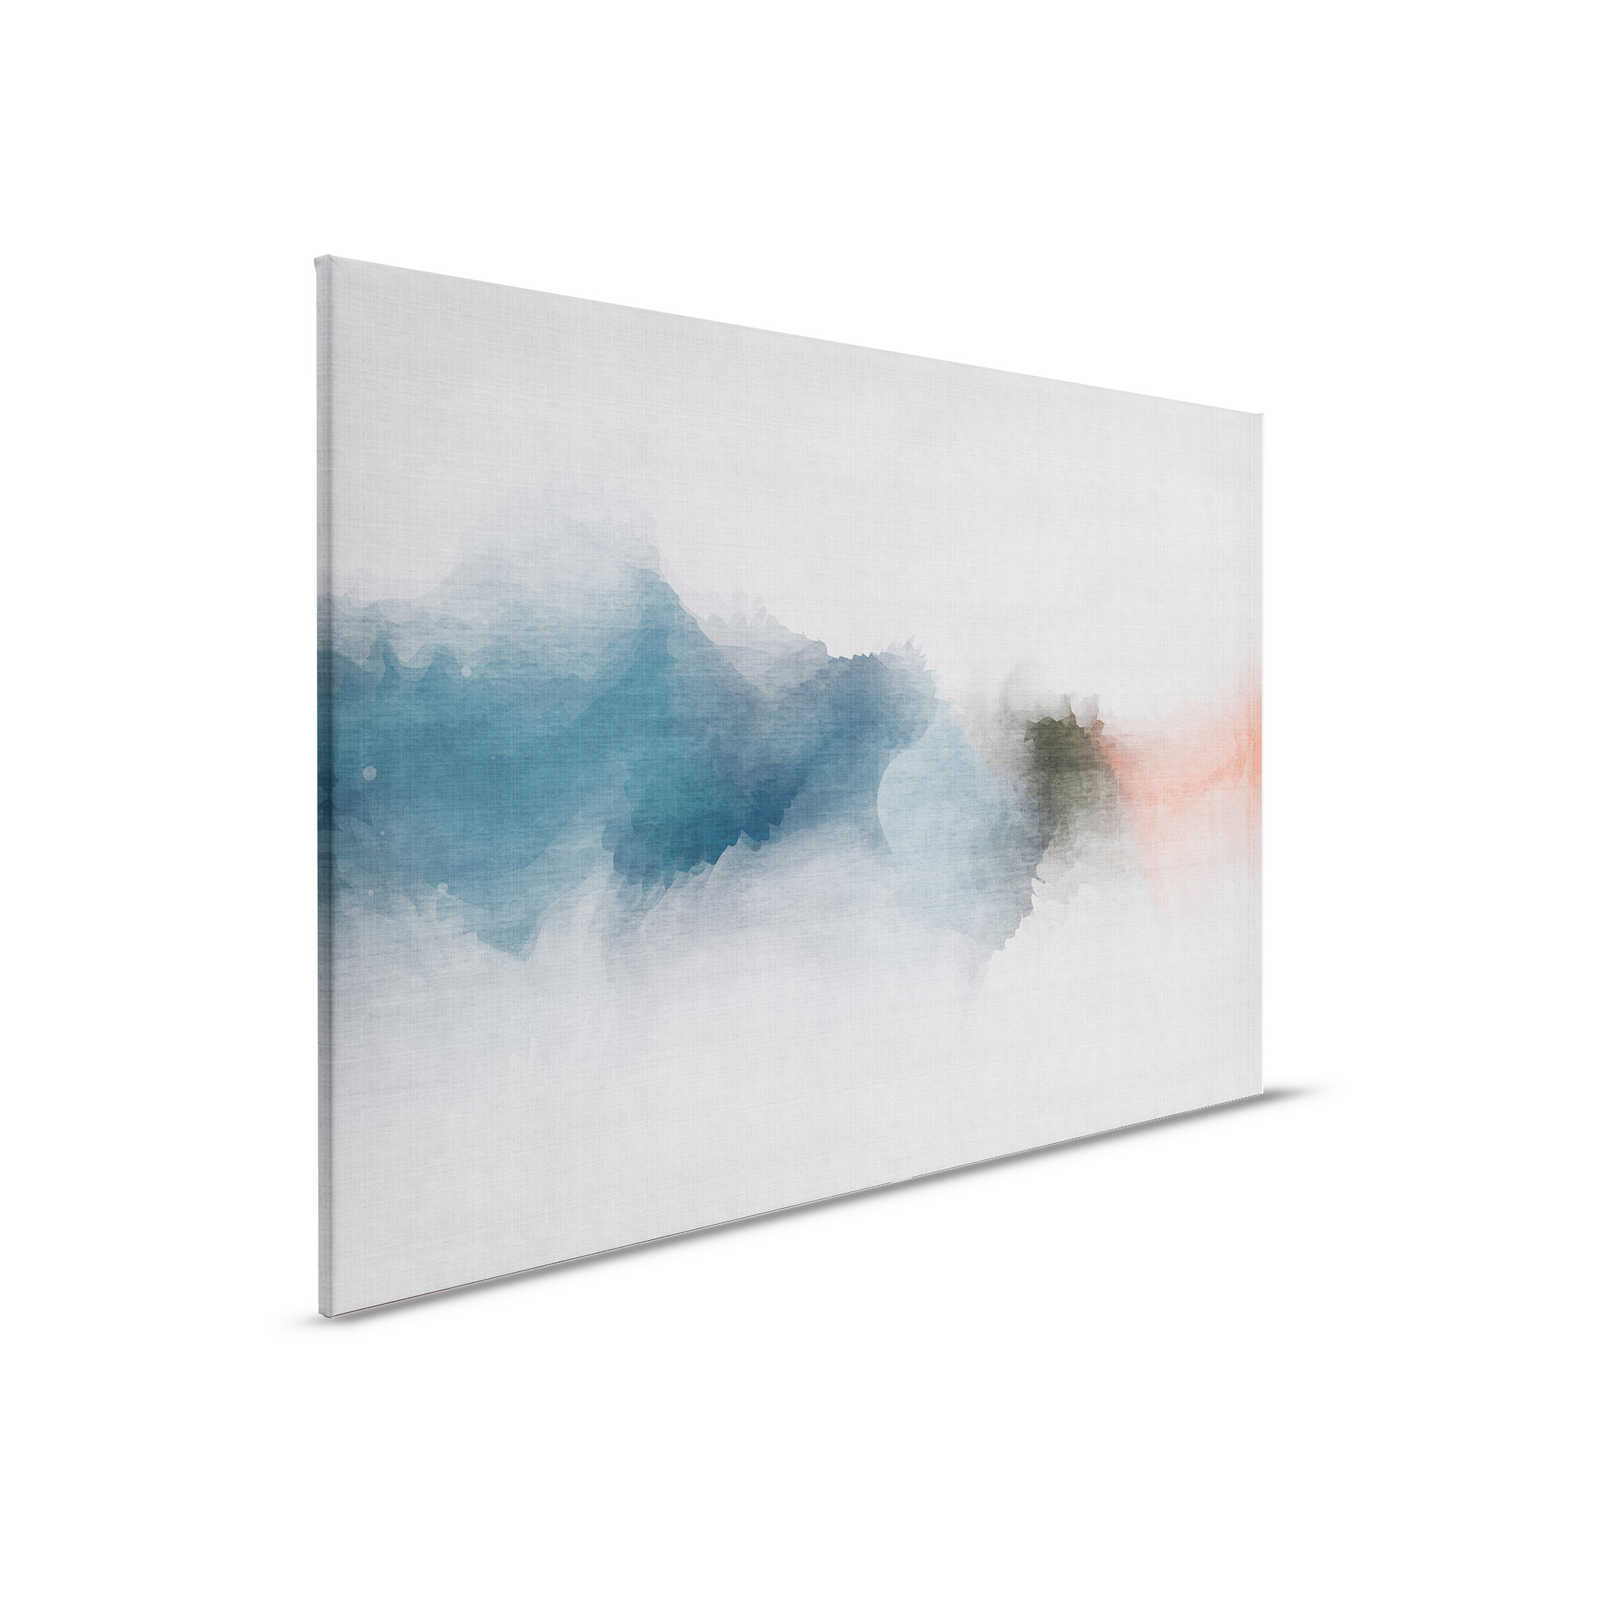         Daydream 1 - Minimalist Watercolour Style Canvas Painting - Nature Linen Texture - 0.90 m x 0.60 m
    